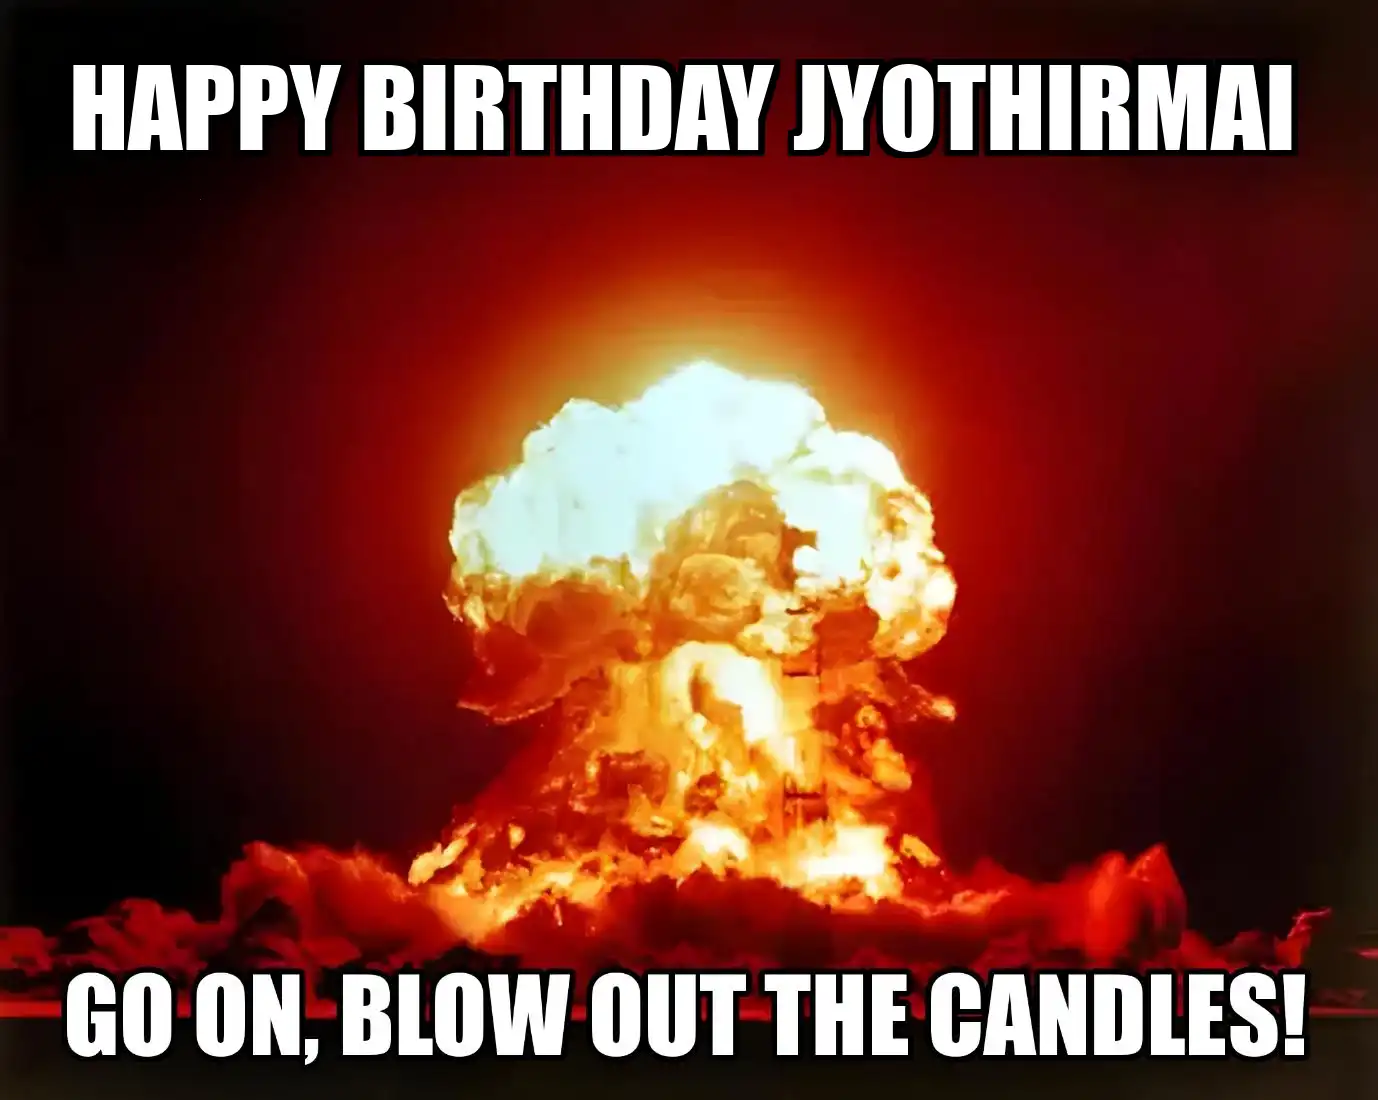 Happy Birthday Jyothirmai Go On Blow Out The Candles Meme